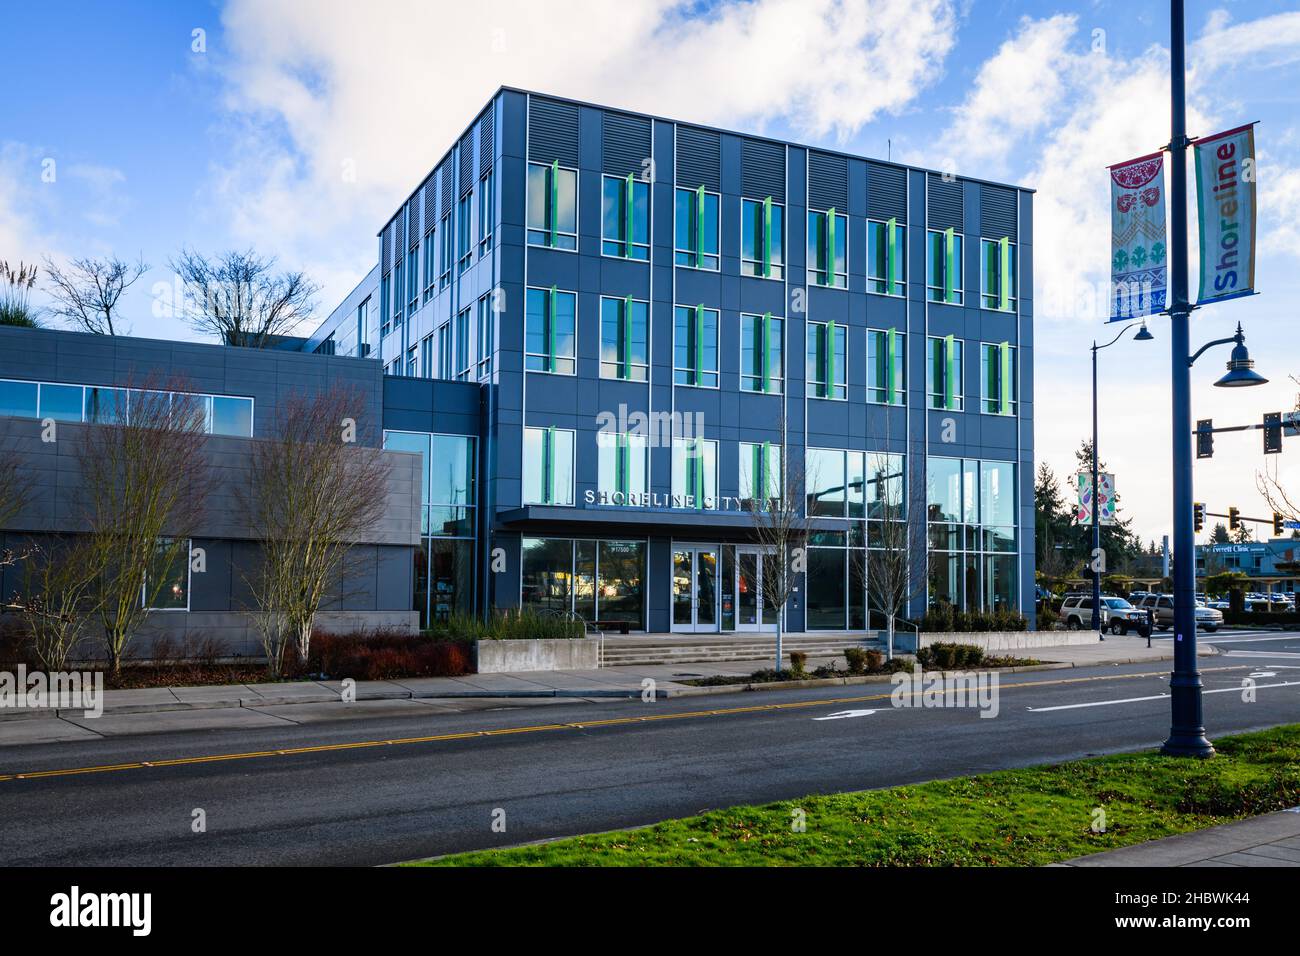 Shoreline, WA, USA - December 19, 2021l Shoreline City Hall building in the community north of Seattle in King County on the Snohomish County line Stock Photo